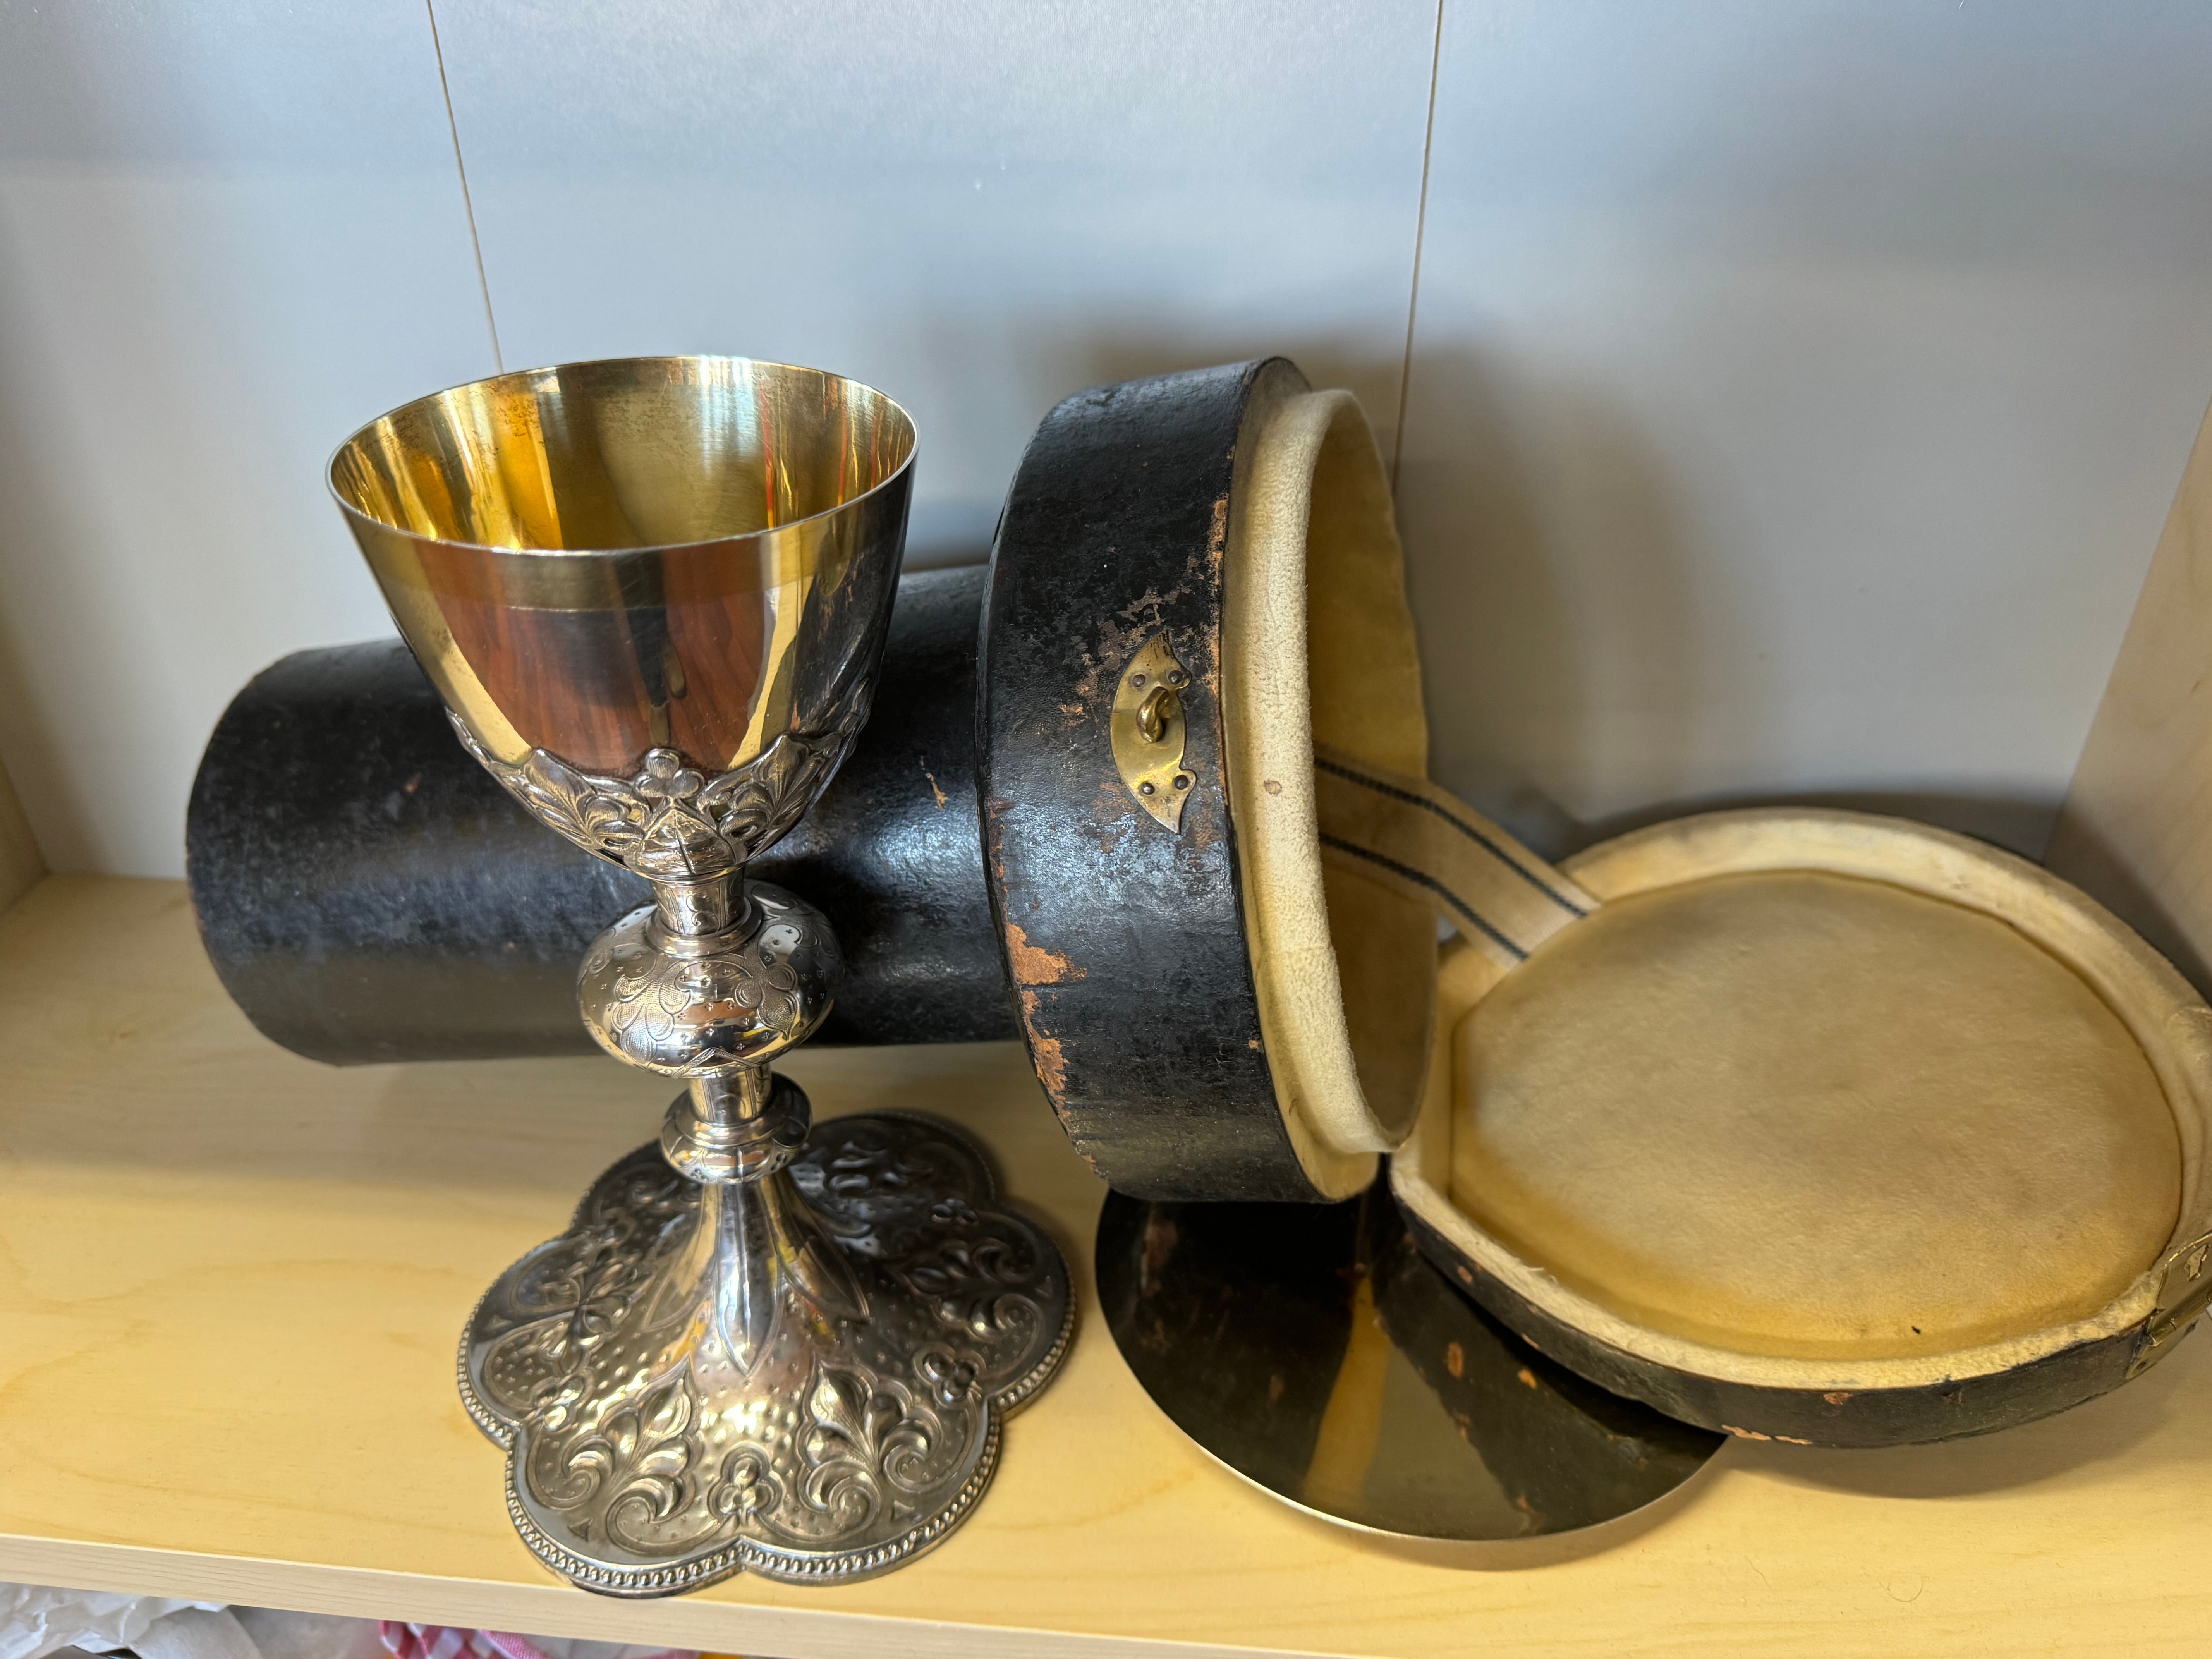  Sterling Silver Communion Chalice and Paten
Made in France.
The cover is bent in the case.
Kalkki and Lautanen intact.
In great condition.

This is from France, that Minerva head stamp was in use from 1838-1973 and with that frame shape meant 950